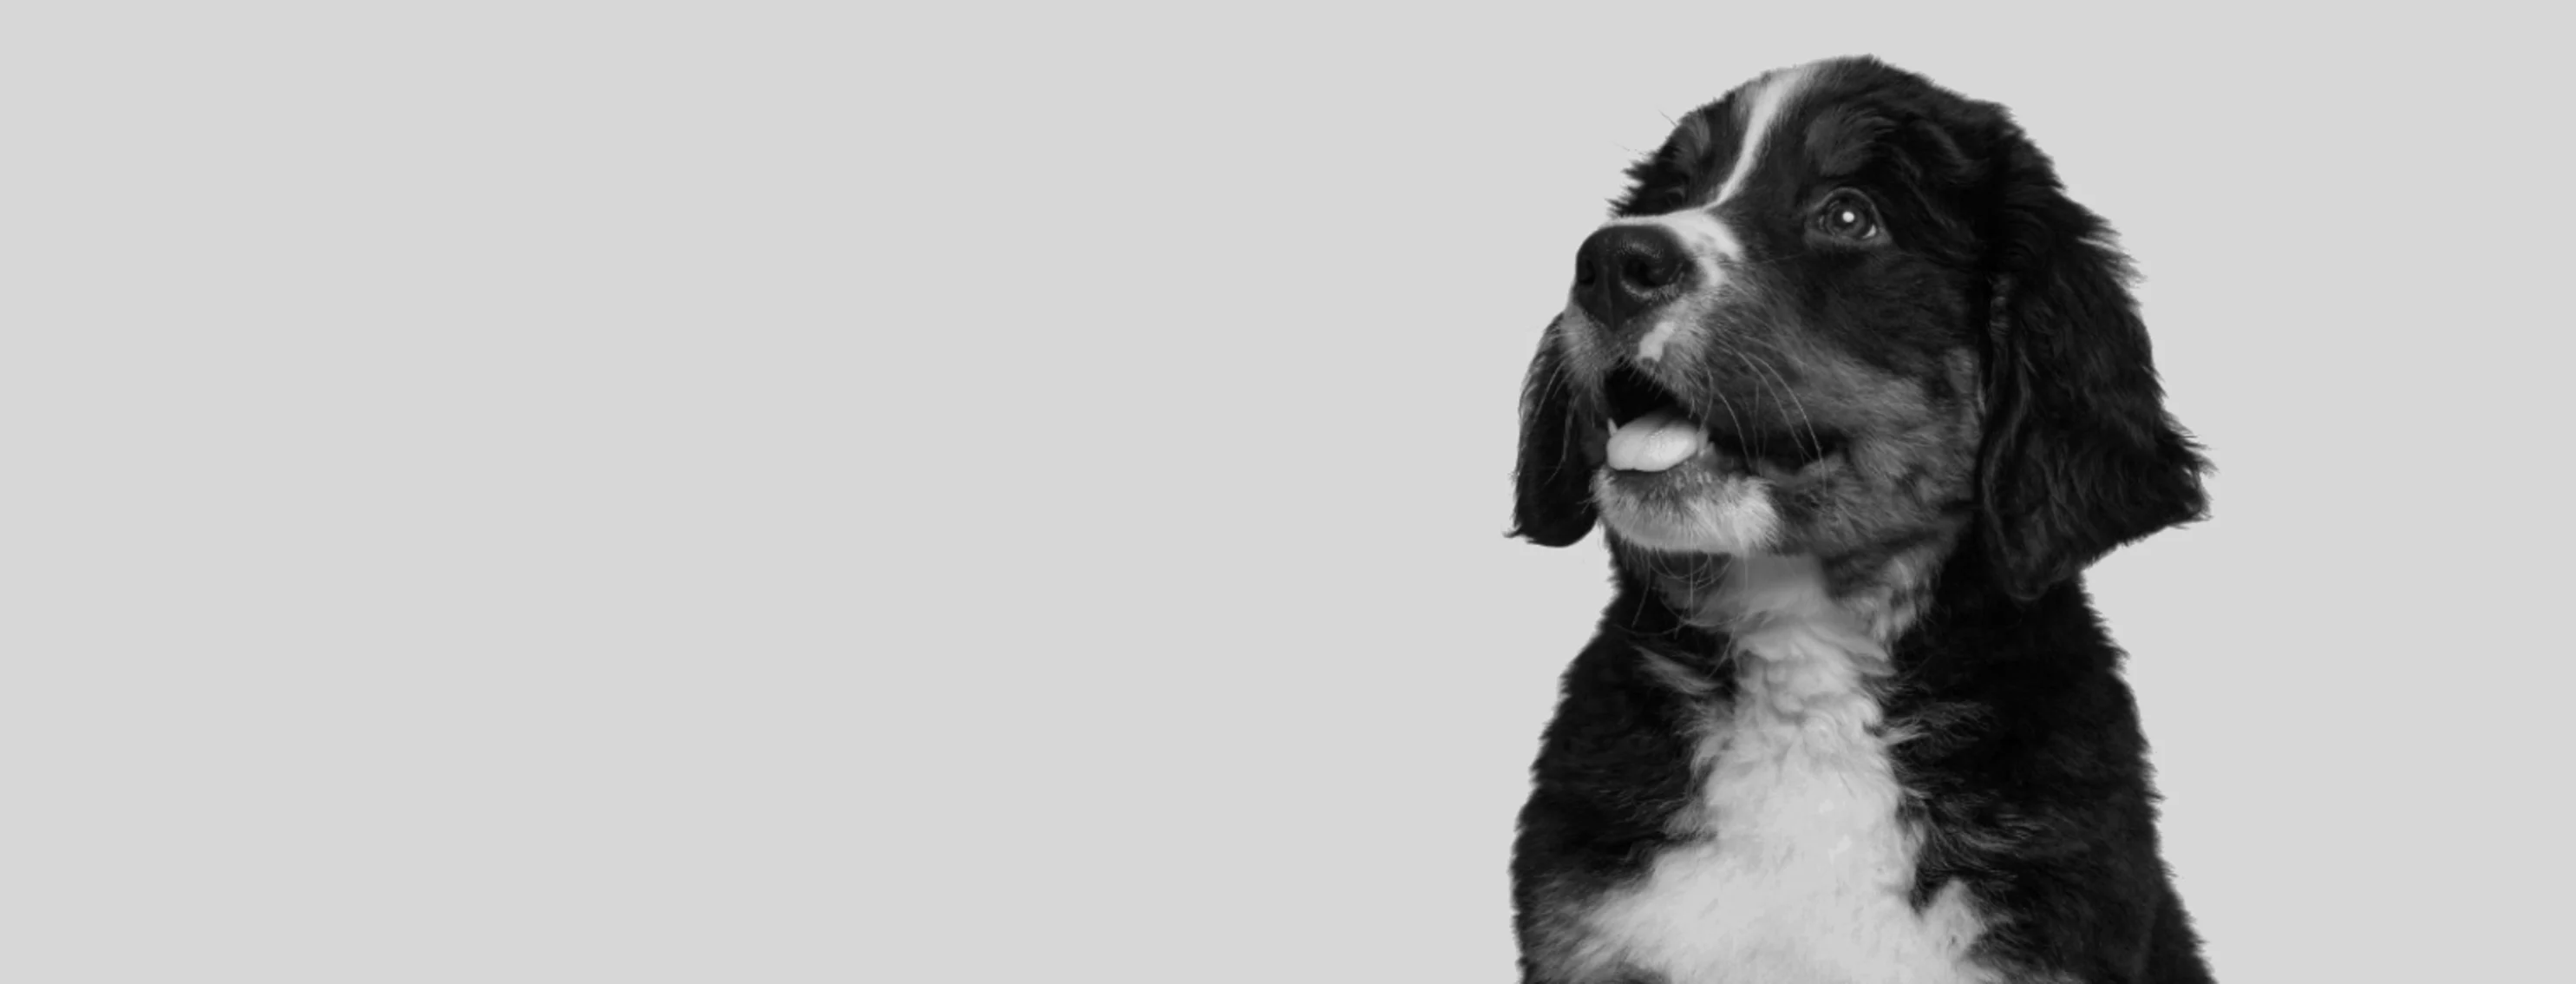 B&W photo of dog looking to the left with tongue out